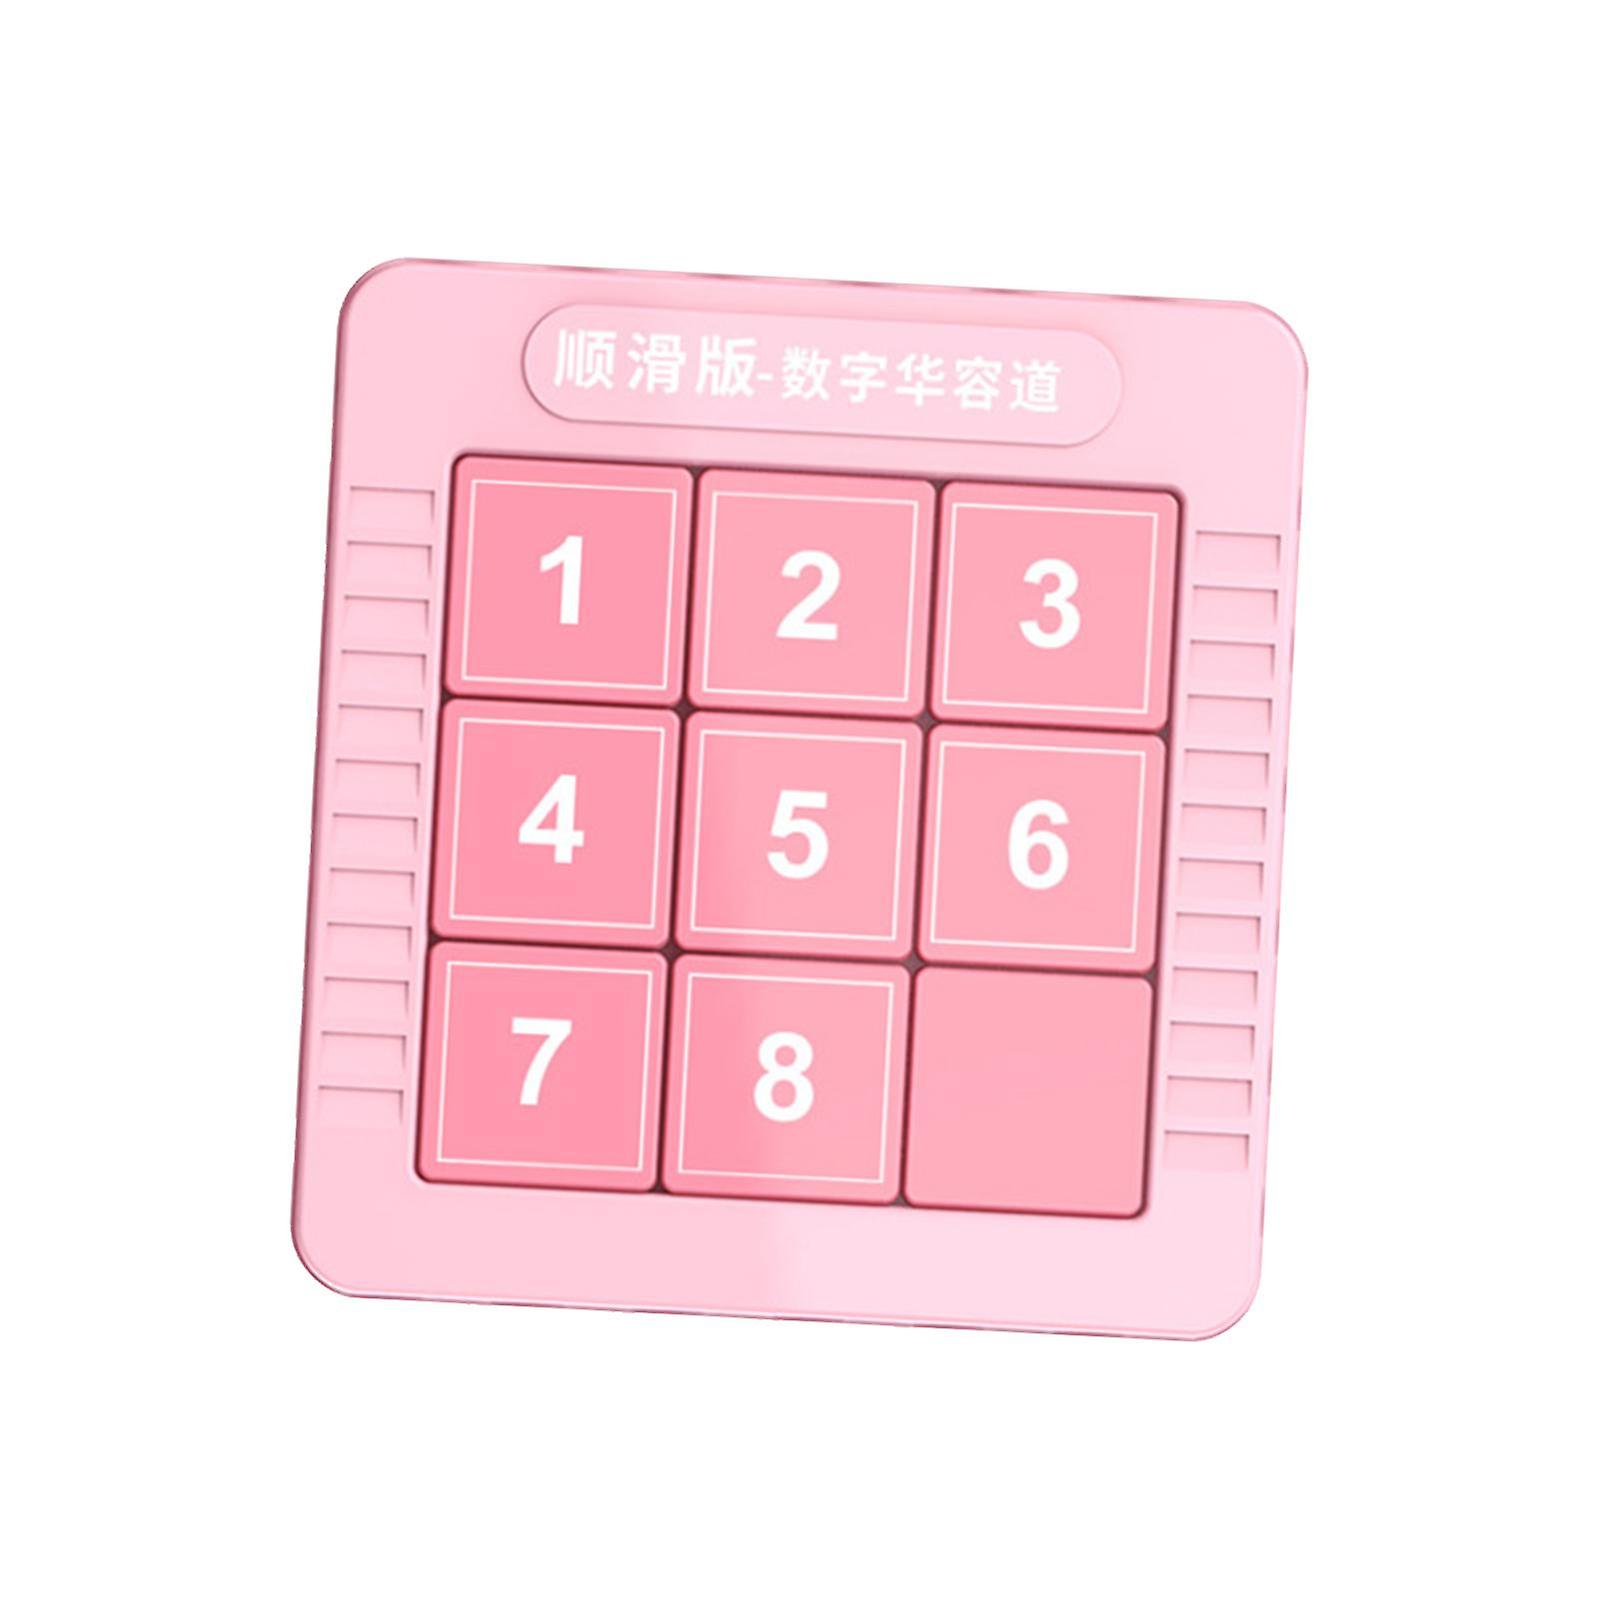 Brain Teaser Sliding Puzzle Number Puzzle For Matching Games Training Travel Pink 3 Floors